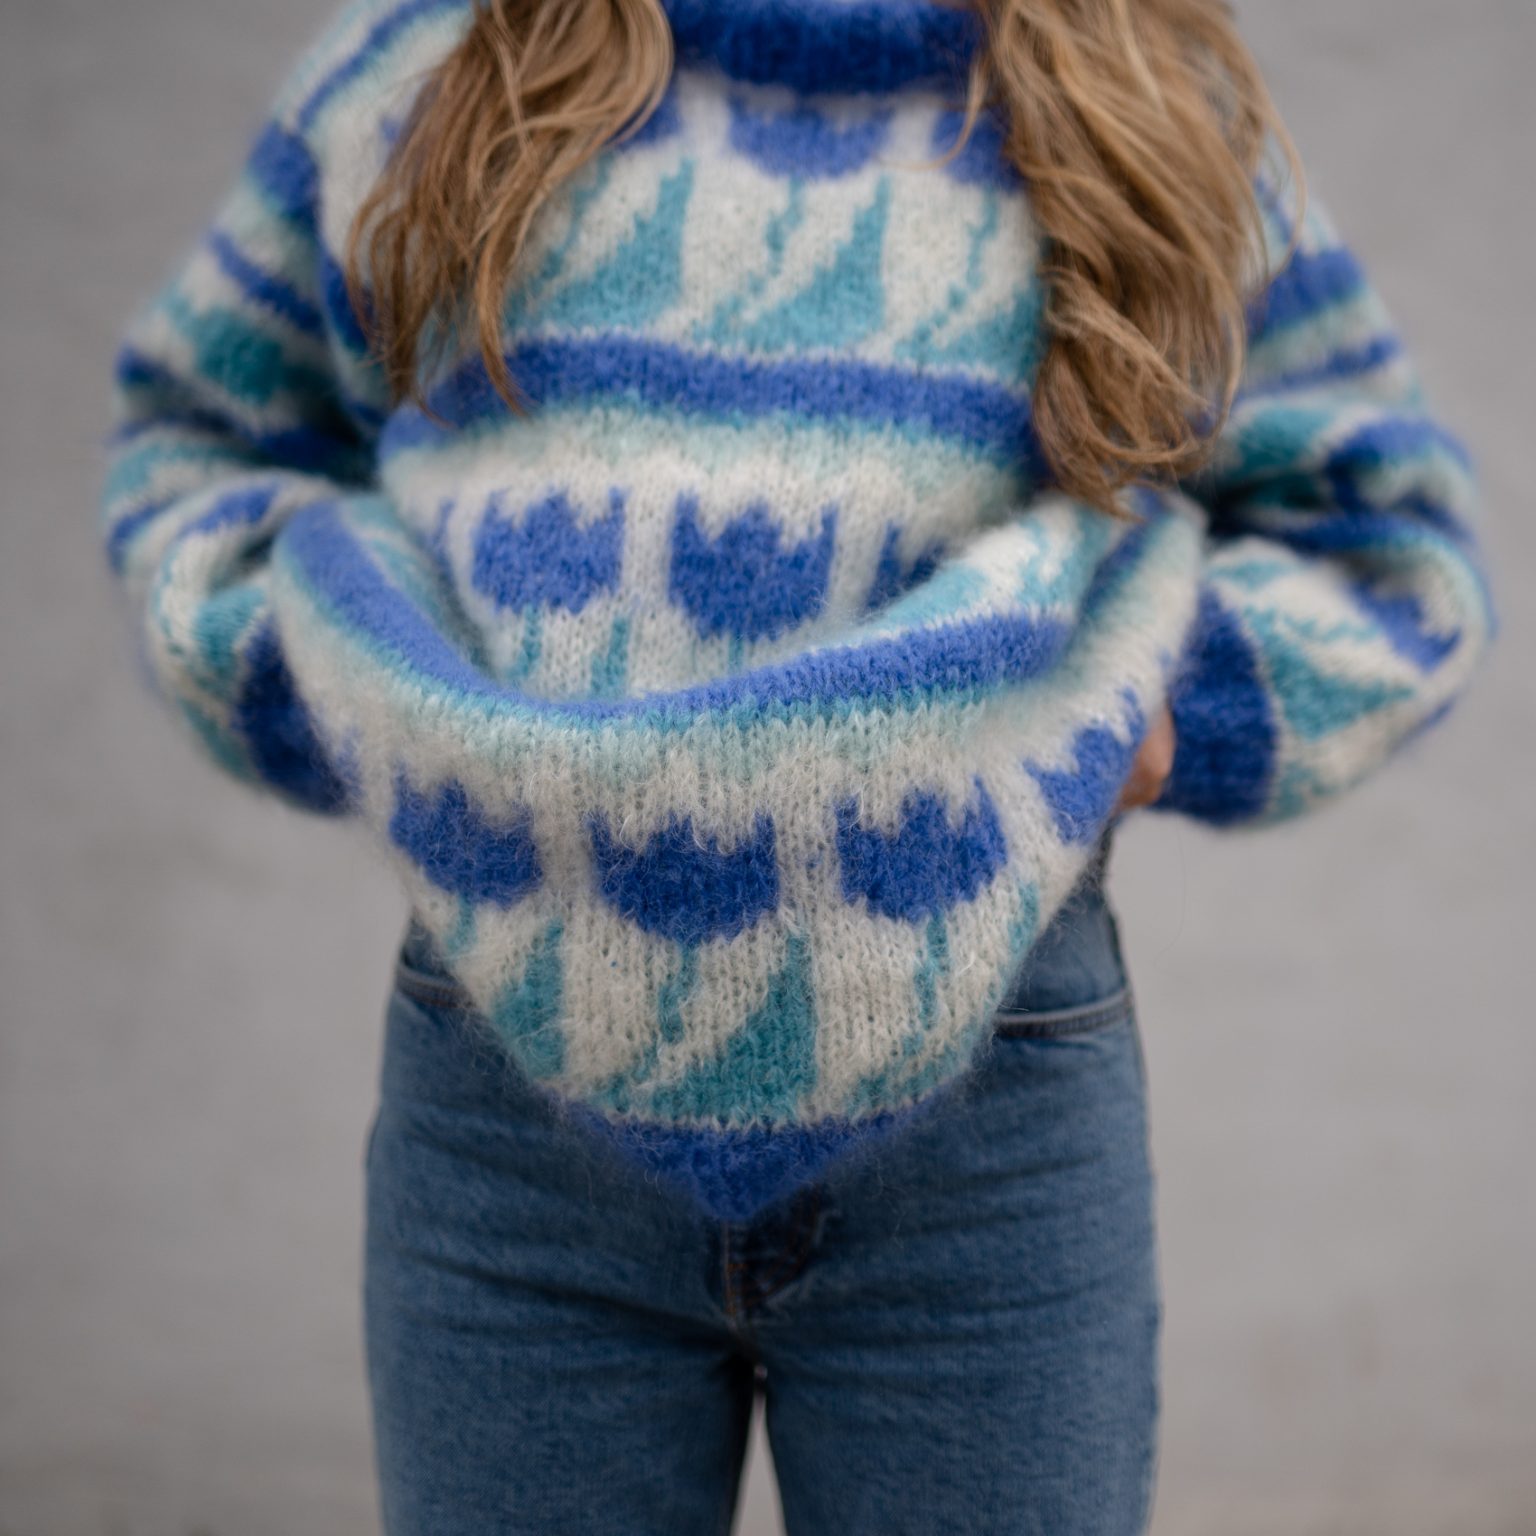 Fluffy Tulip sweater| Mohair sweater by HipKnitShop